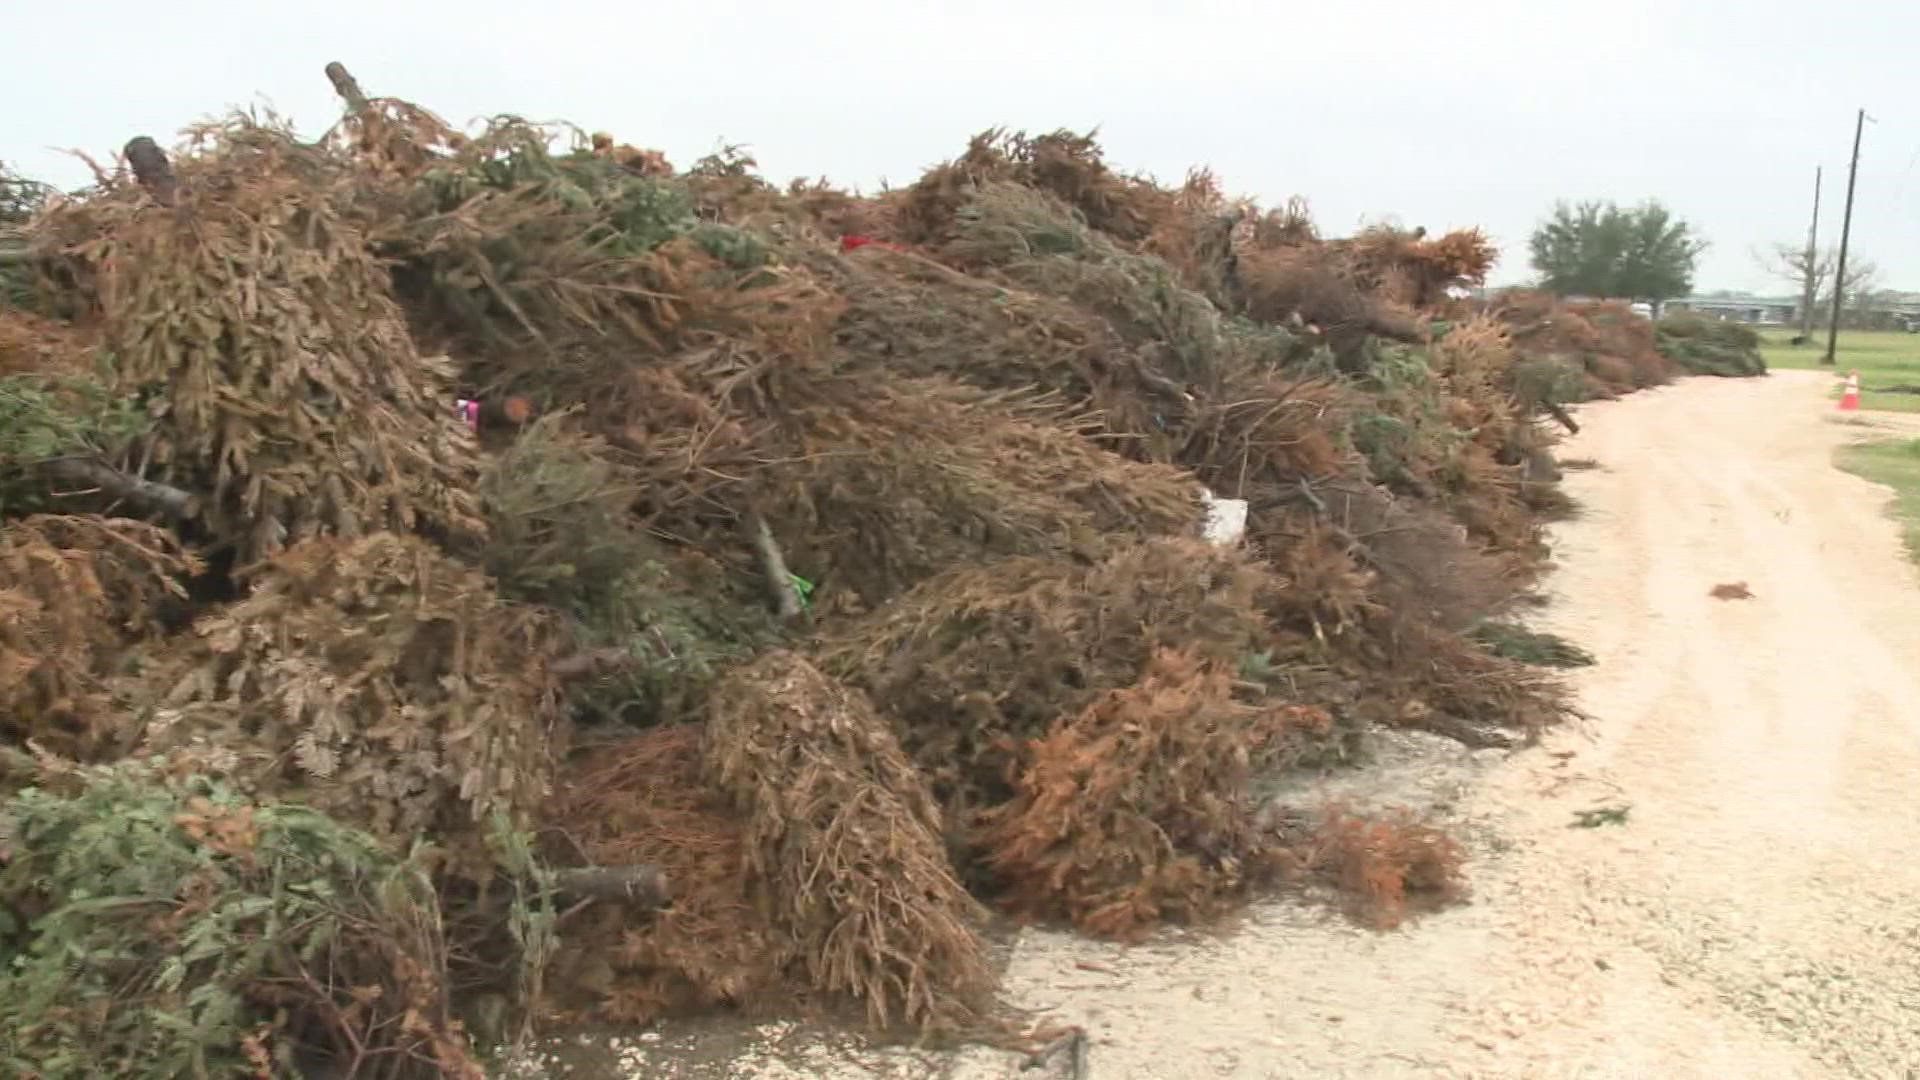 Would doing something like the annual Christmas tree project with storm debris help build up the coastline?